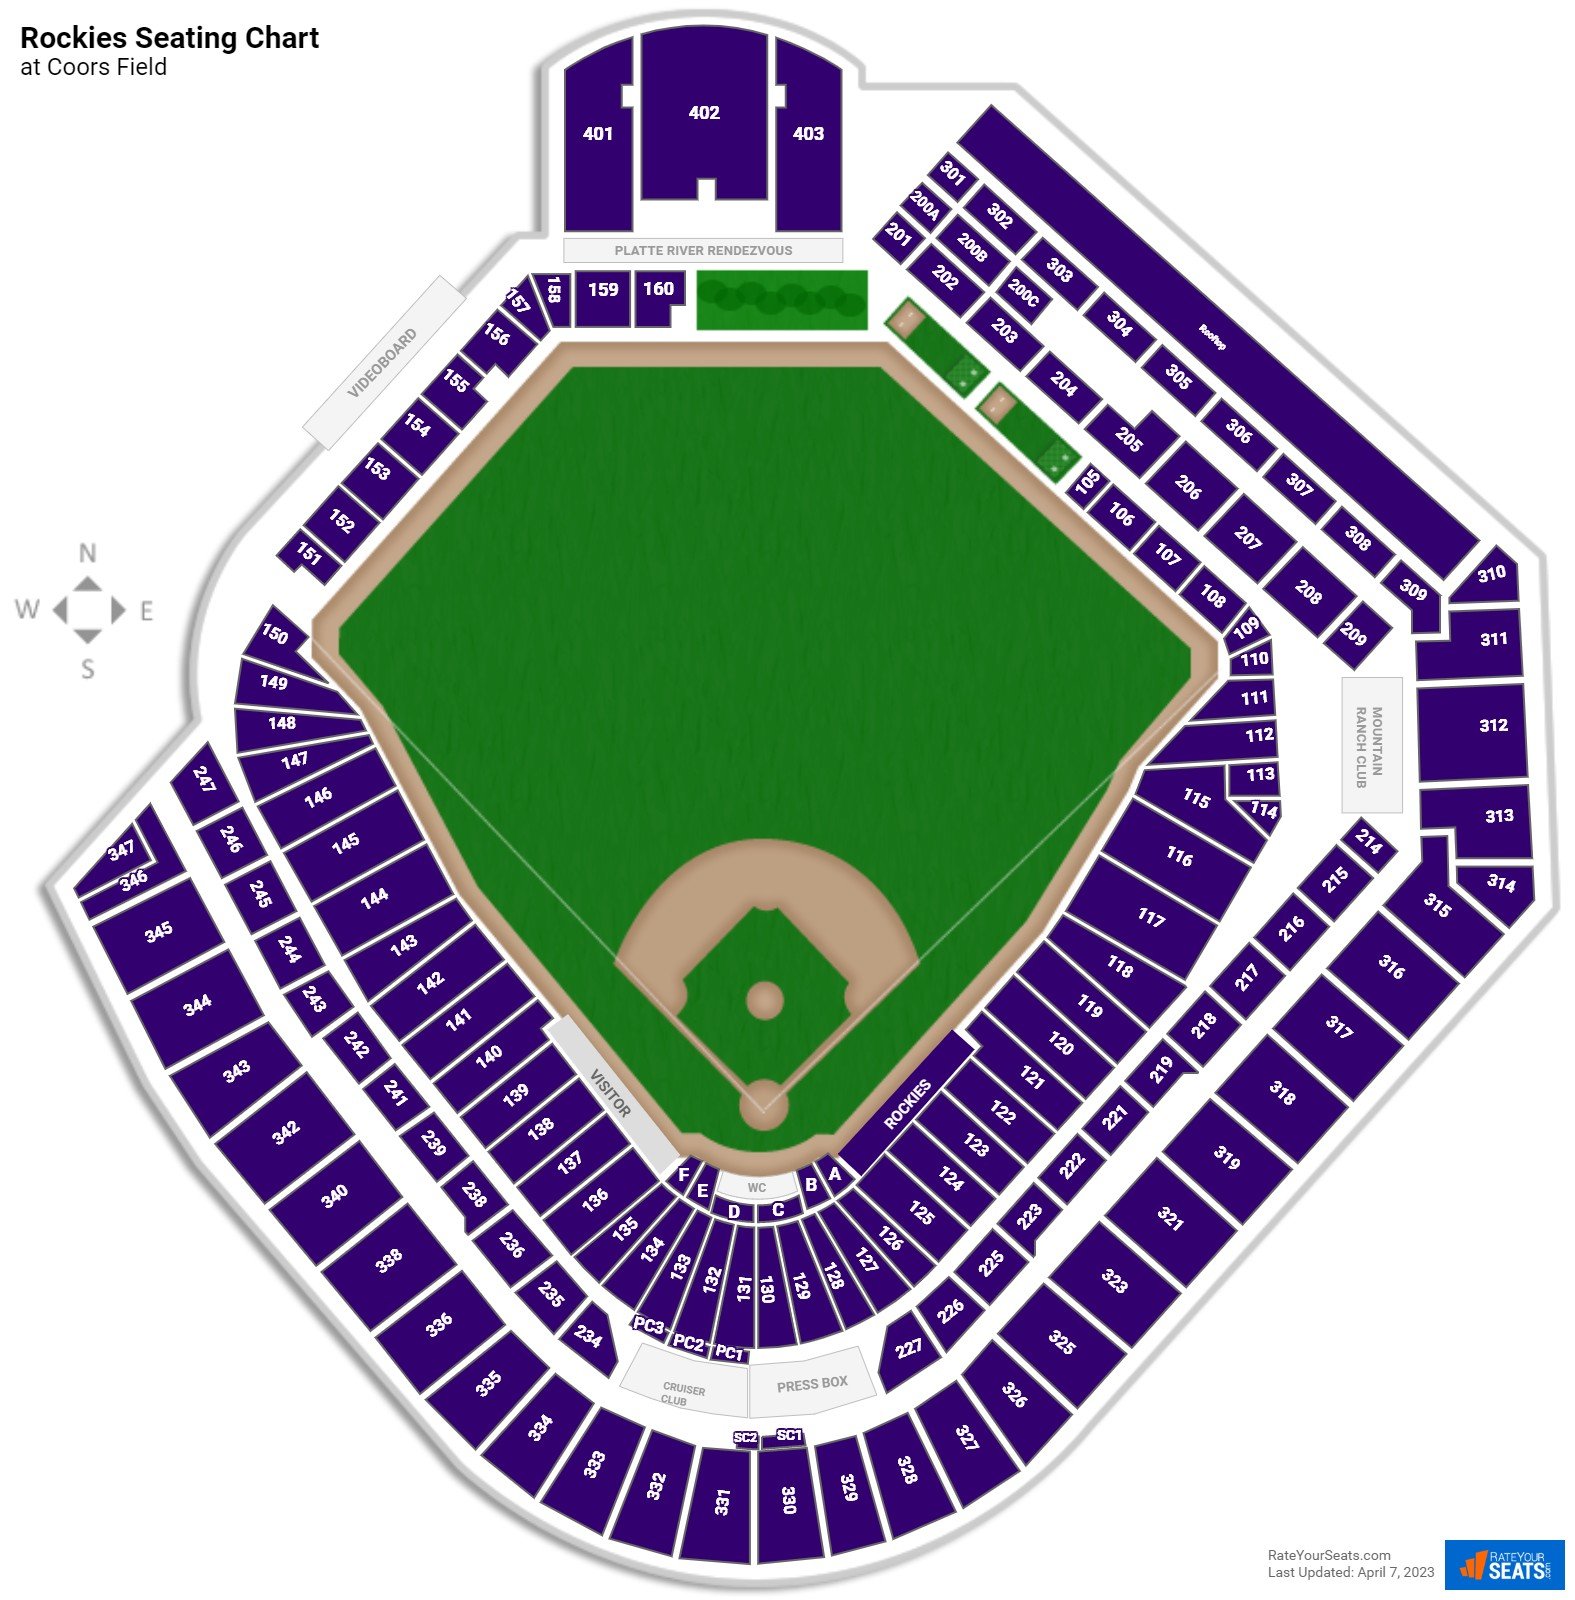 Rockies Seating Chart At Coors Field 